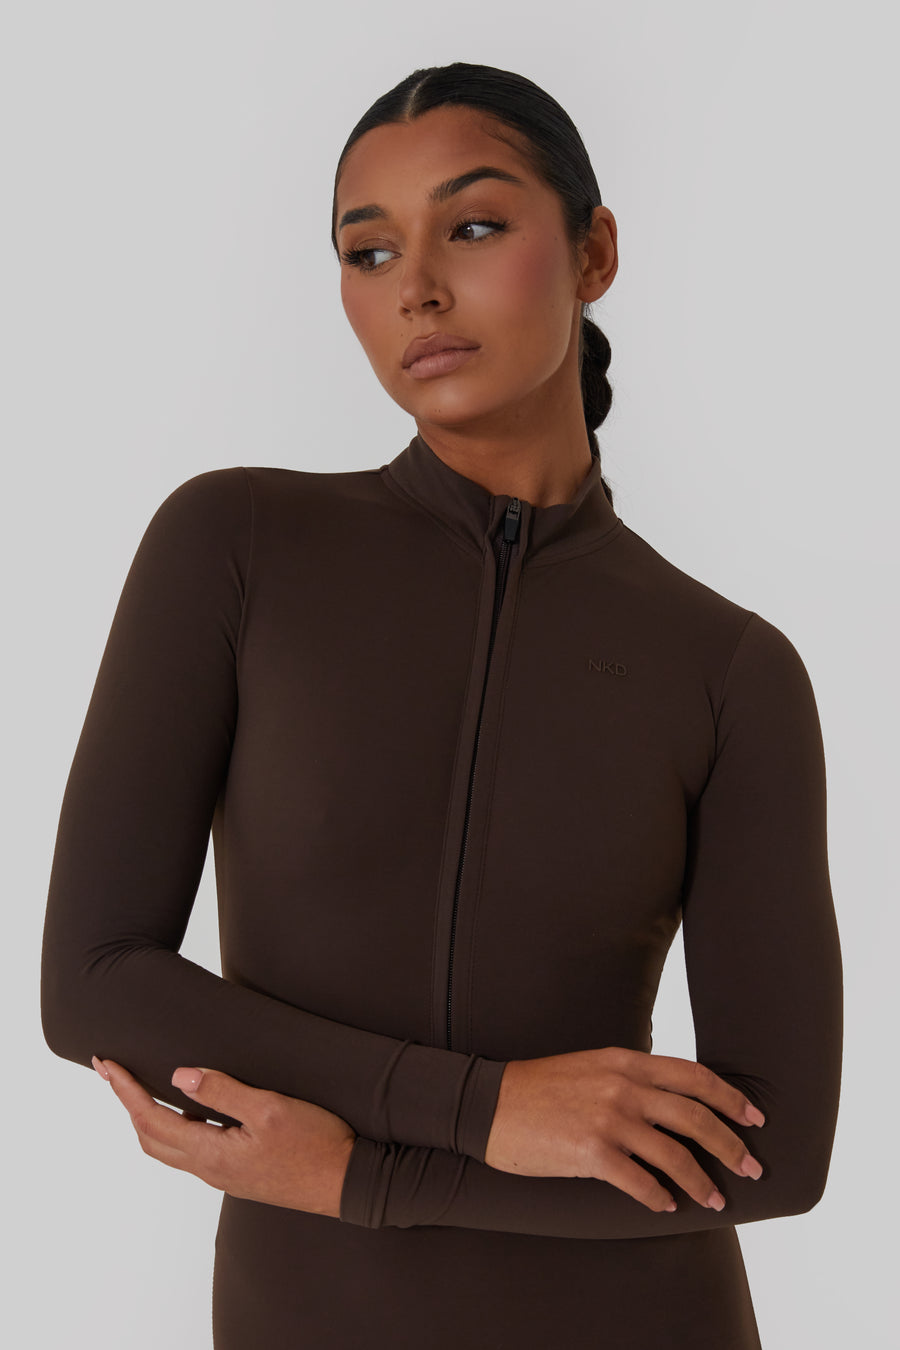 Long Sleeved Shaped Jumpsuit - Cocoa Bean